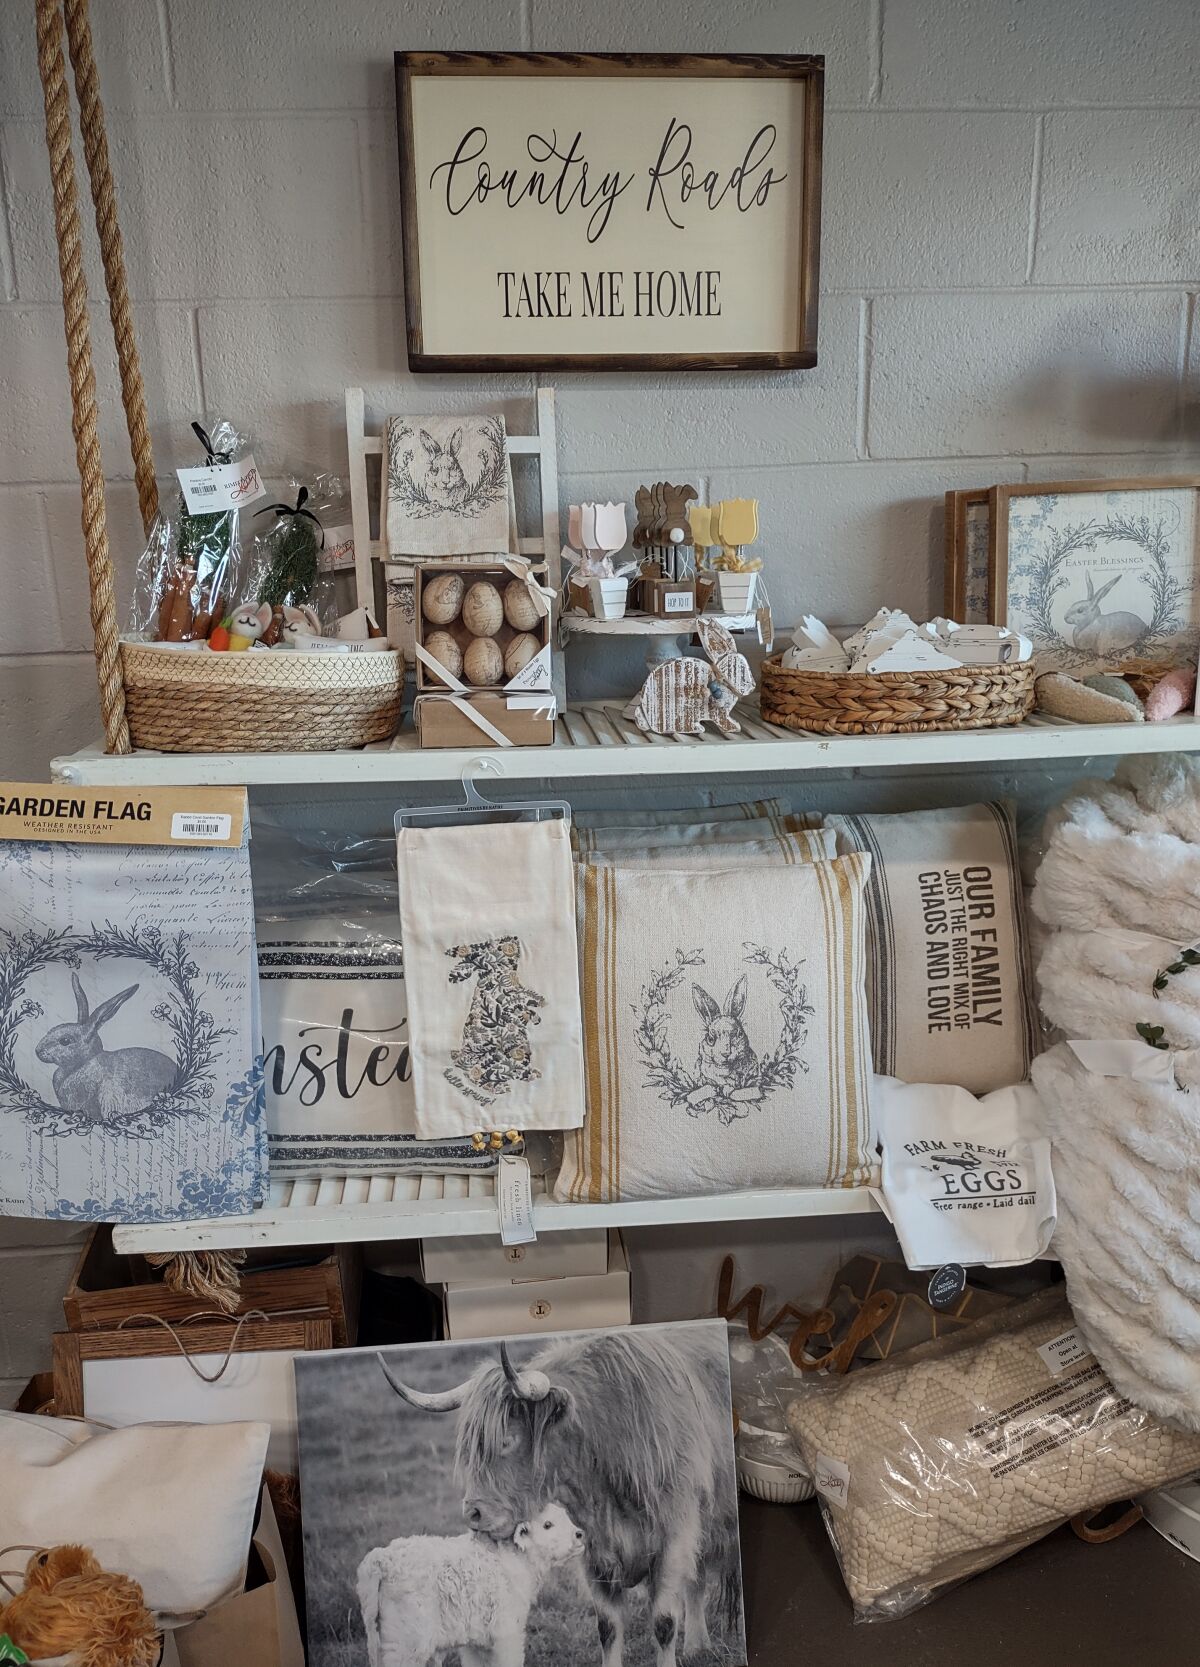 Seasonal Easter decorations line the shelves of a section of Rustic Interiors.